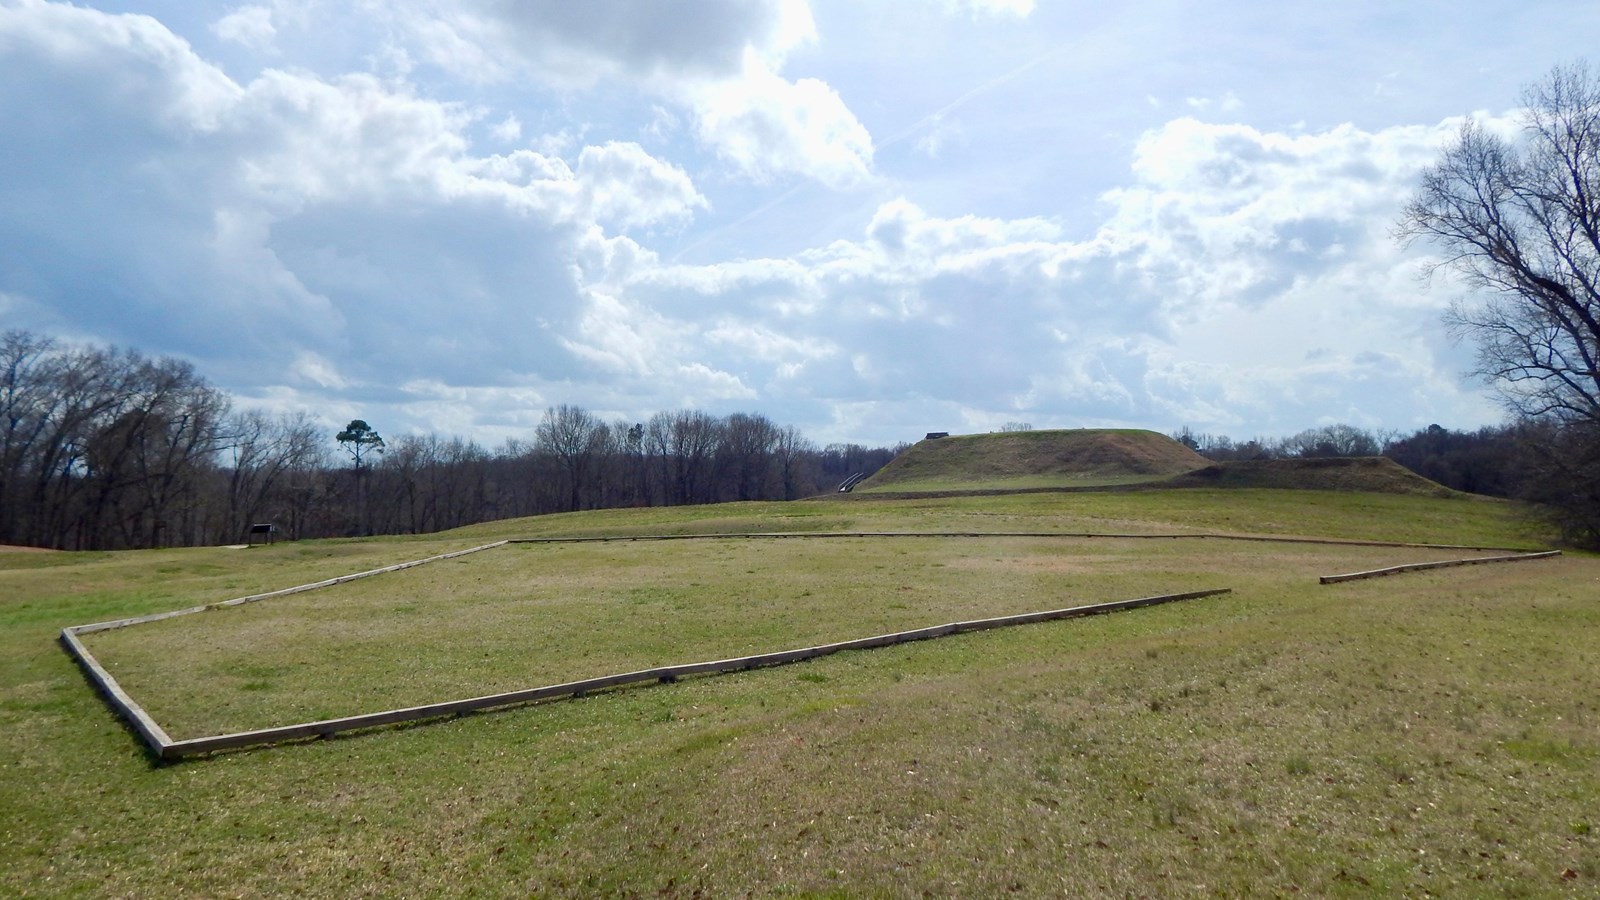 A wooden outline of the foundation of the trading post in a grassy field.